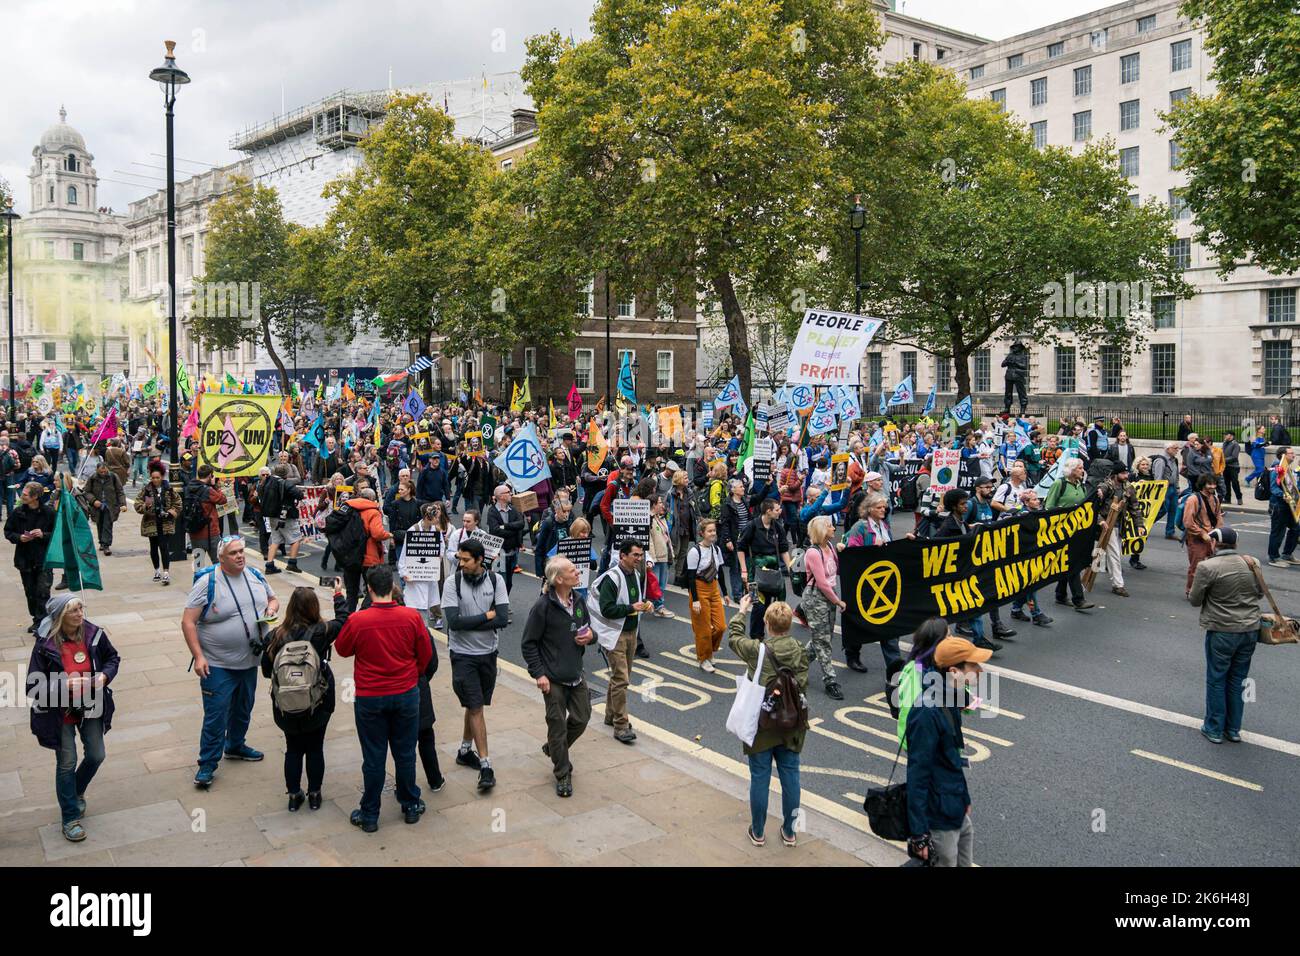 London, UK. 14 Oct, 2022. Extinction Rebellion protesters march from Trafalgar Square to Downing Street via Whitehall demanding the government does more to address climate change, in London, UK. Credit: Vladimir Morozov/Alamy Live News. Stock Photo